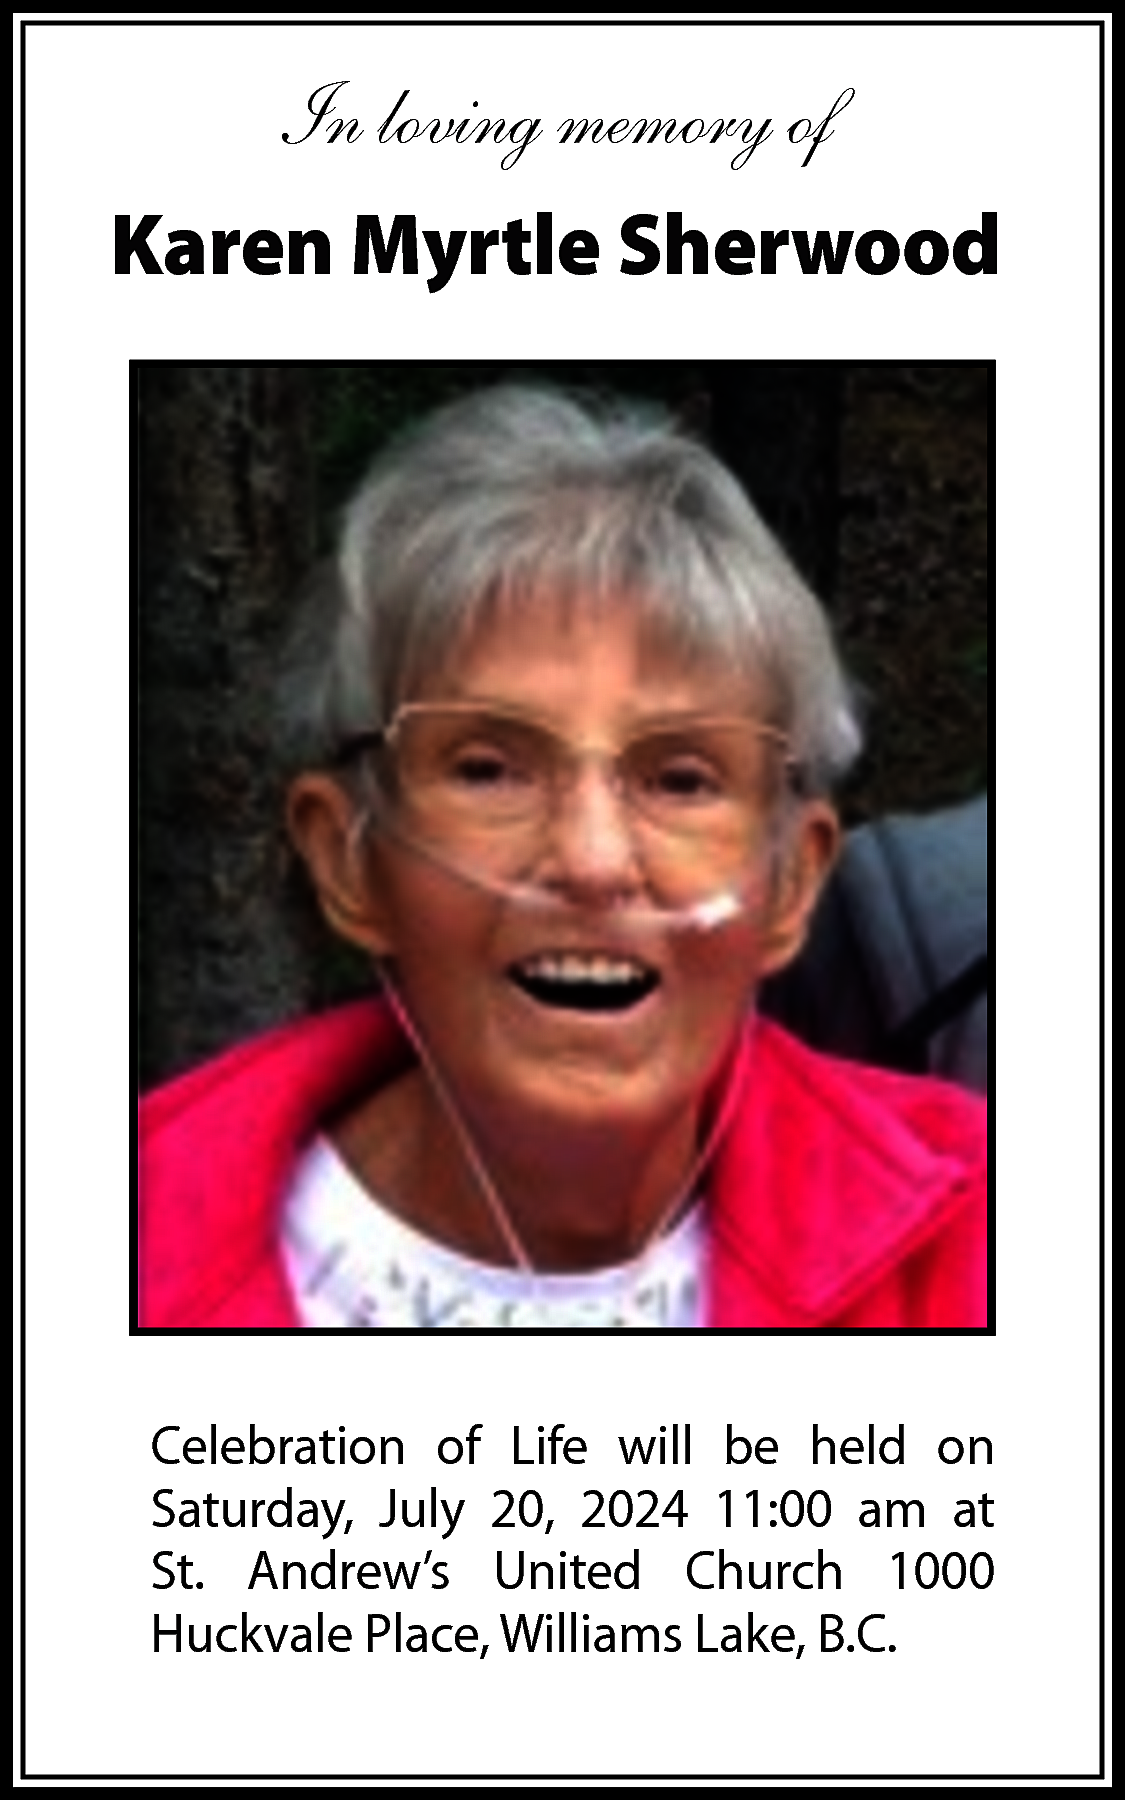 In loving memory of <br>Karen  In loving memory of  Karen Myrtle Sherwood    Celebration of Life will be held on  Saturday, July 20, 2024 11:00 am at  St. Andrew’s United Church 1000  Huckvale Place, Williams Lake, B.C.    